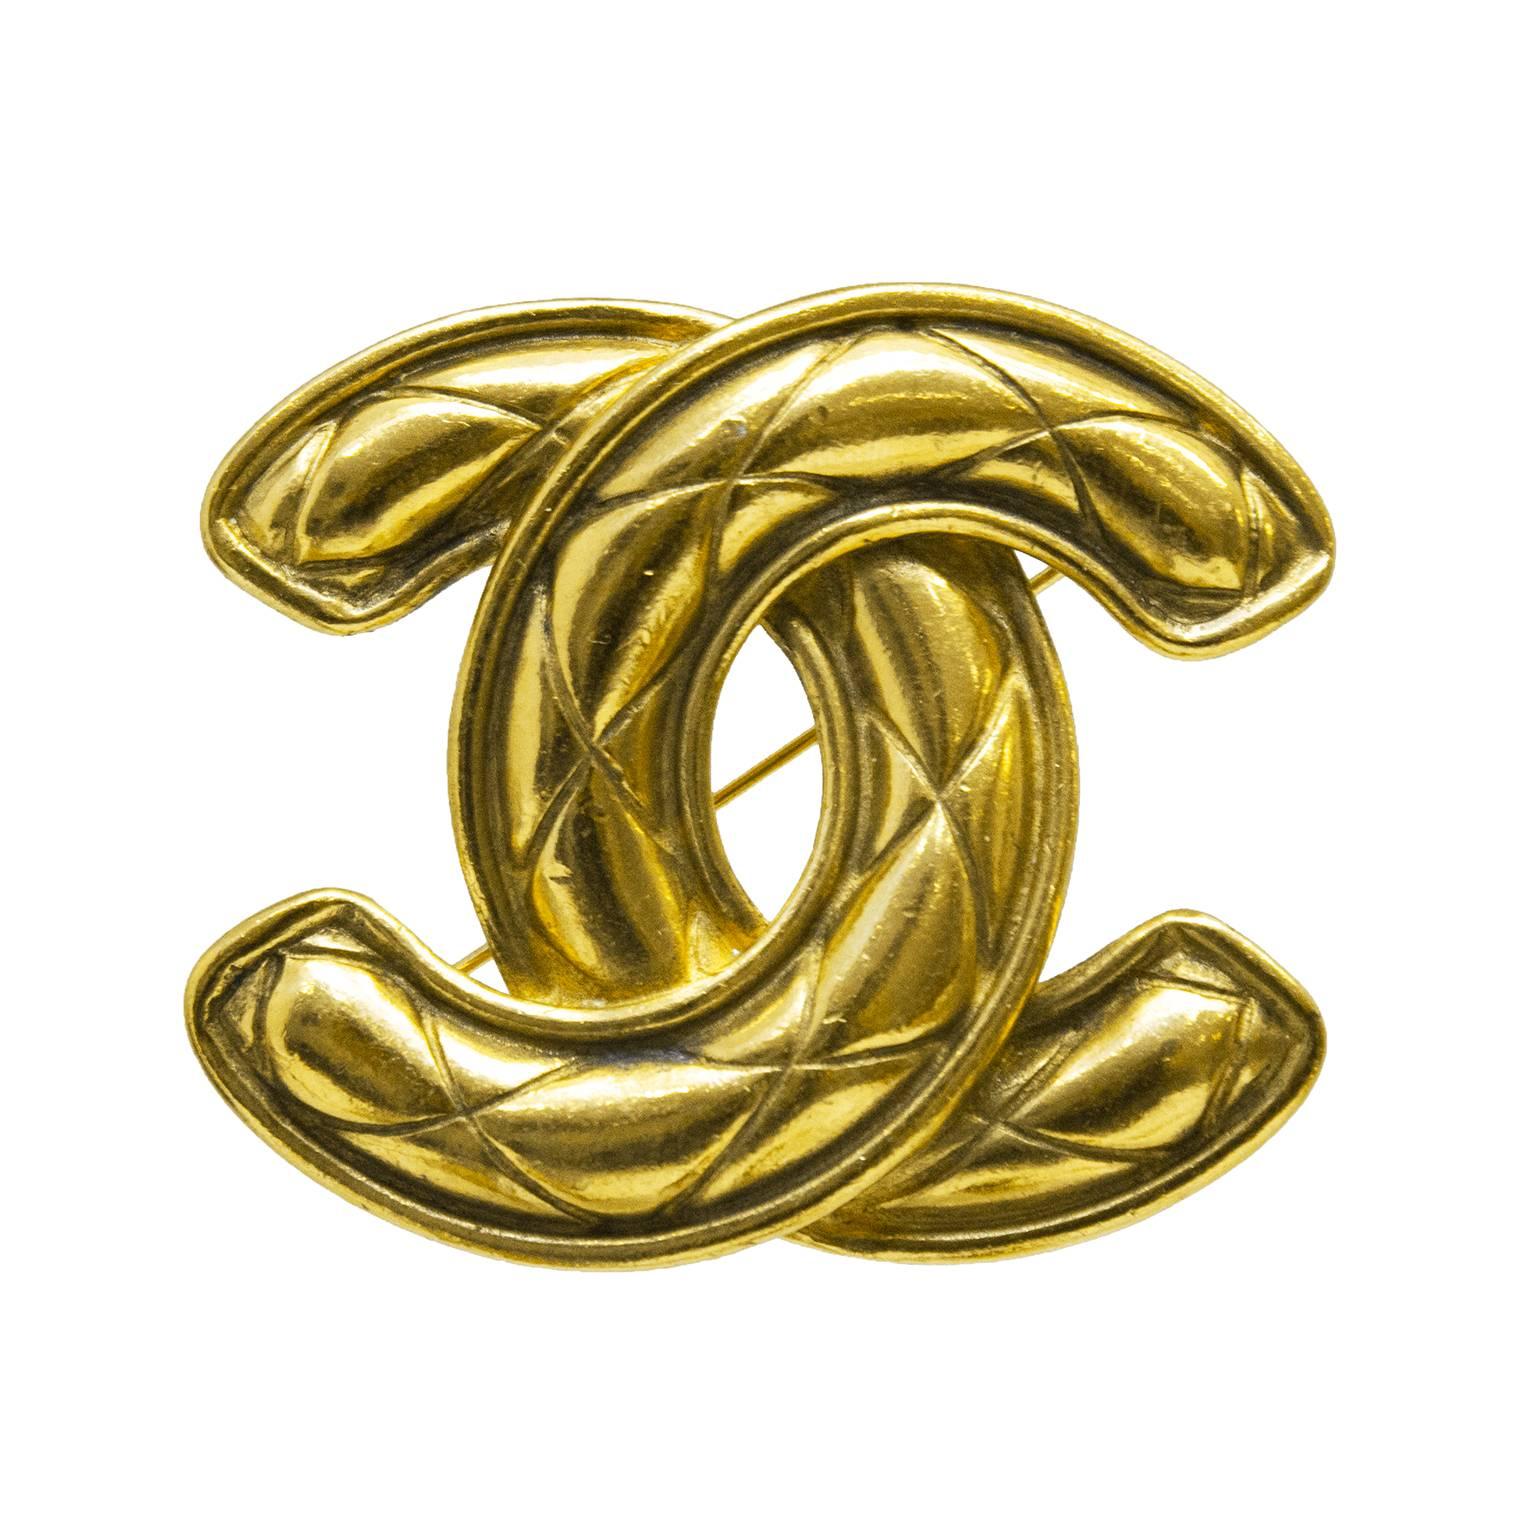 Circa 1990 Chanel Double CC Gold Plated Brooch